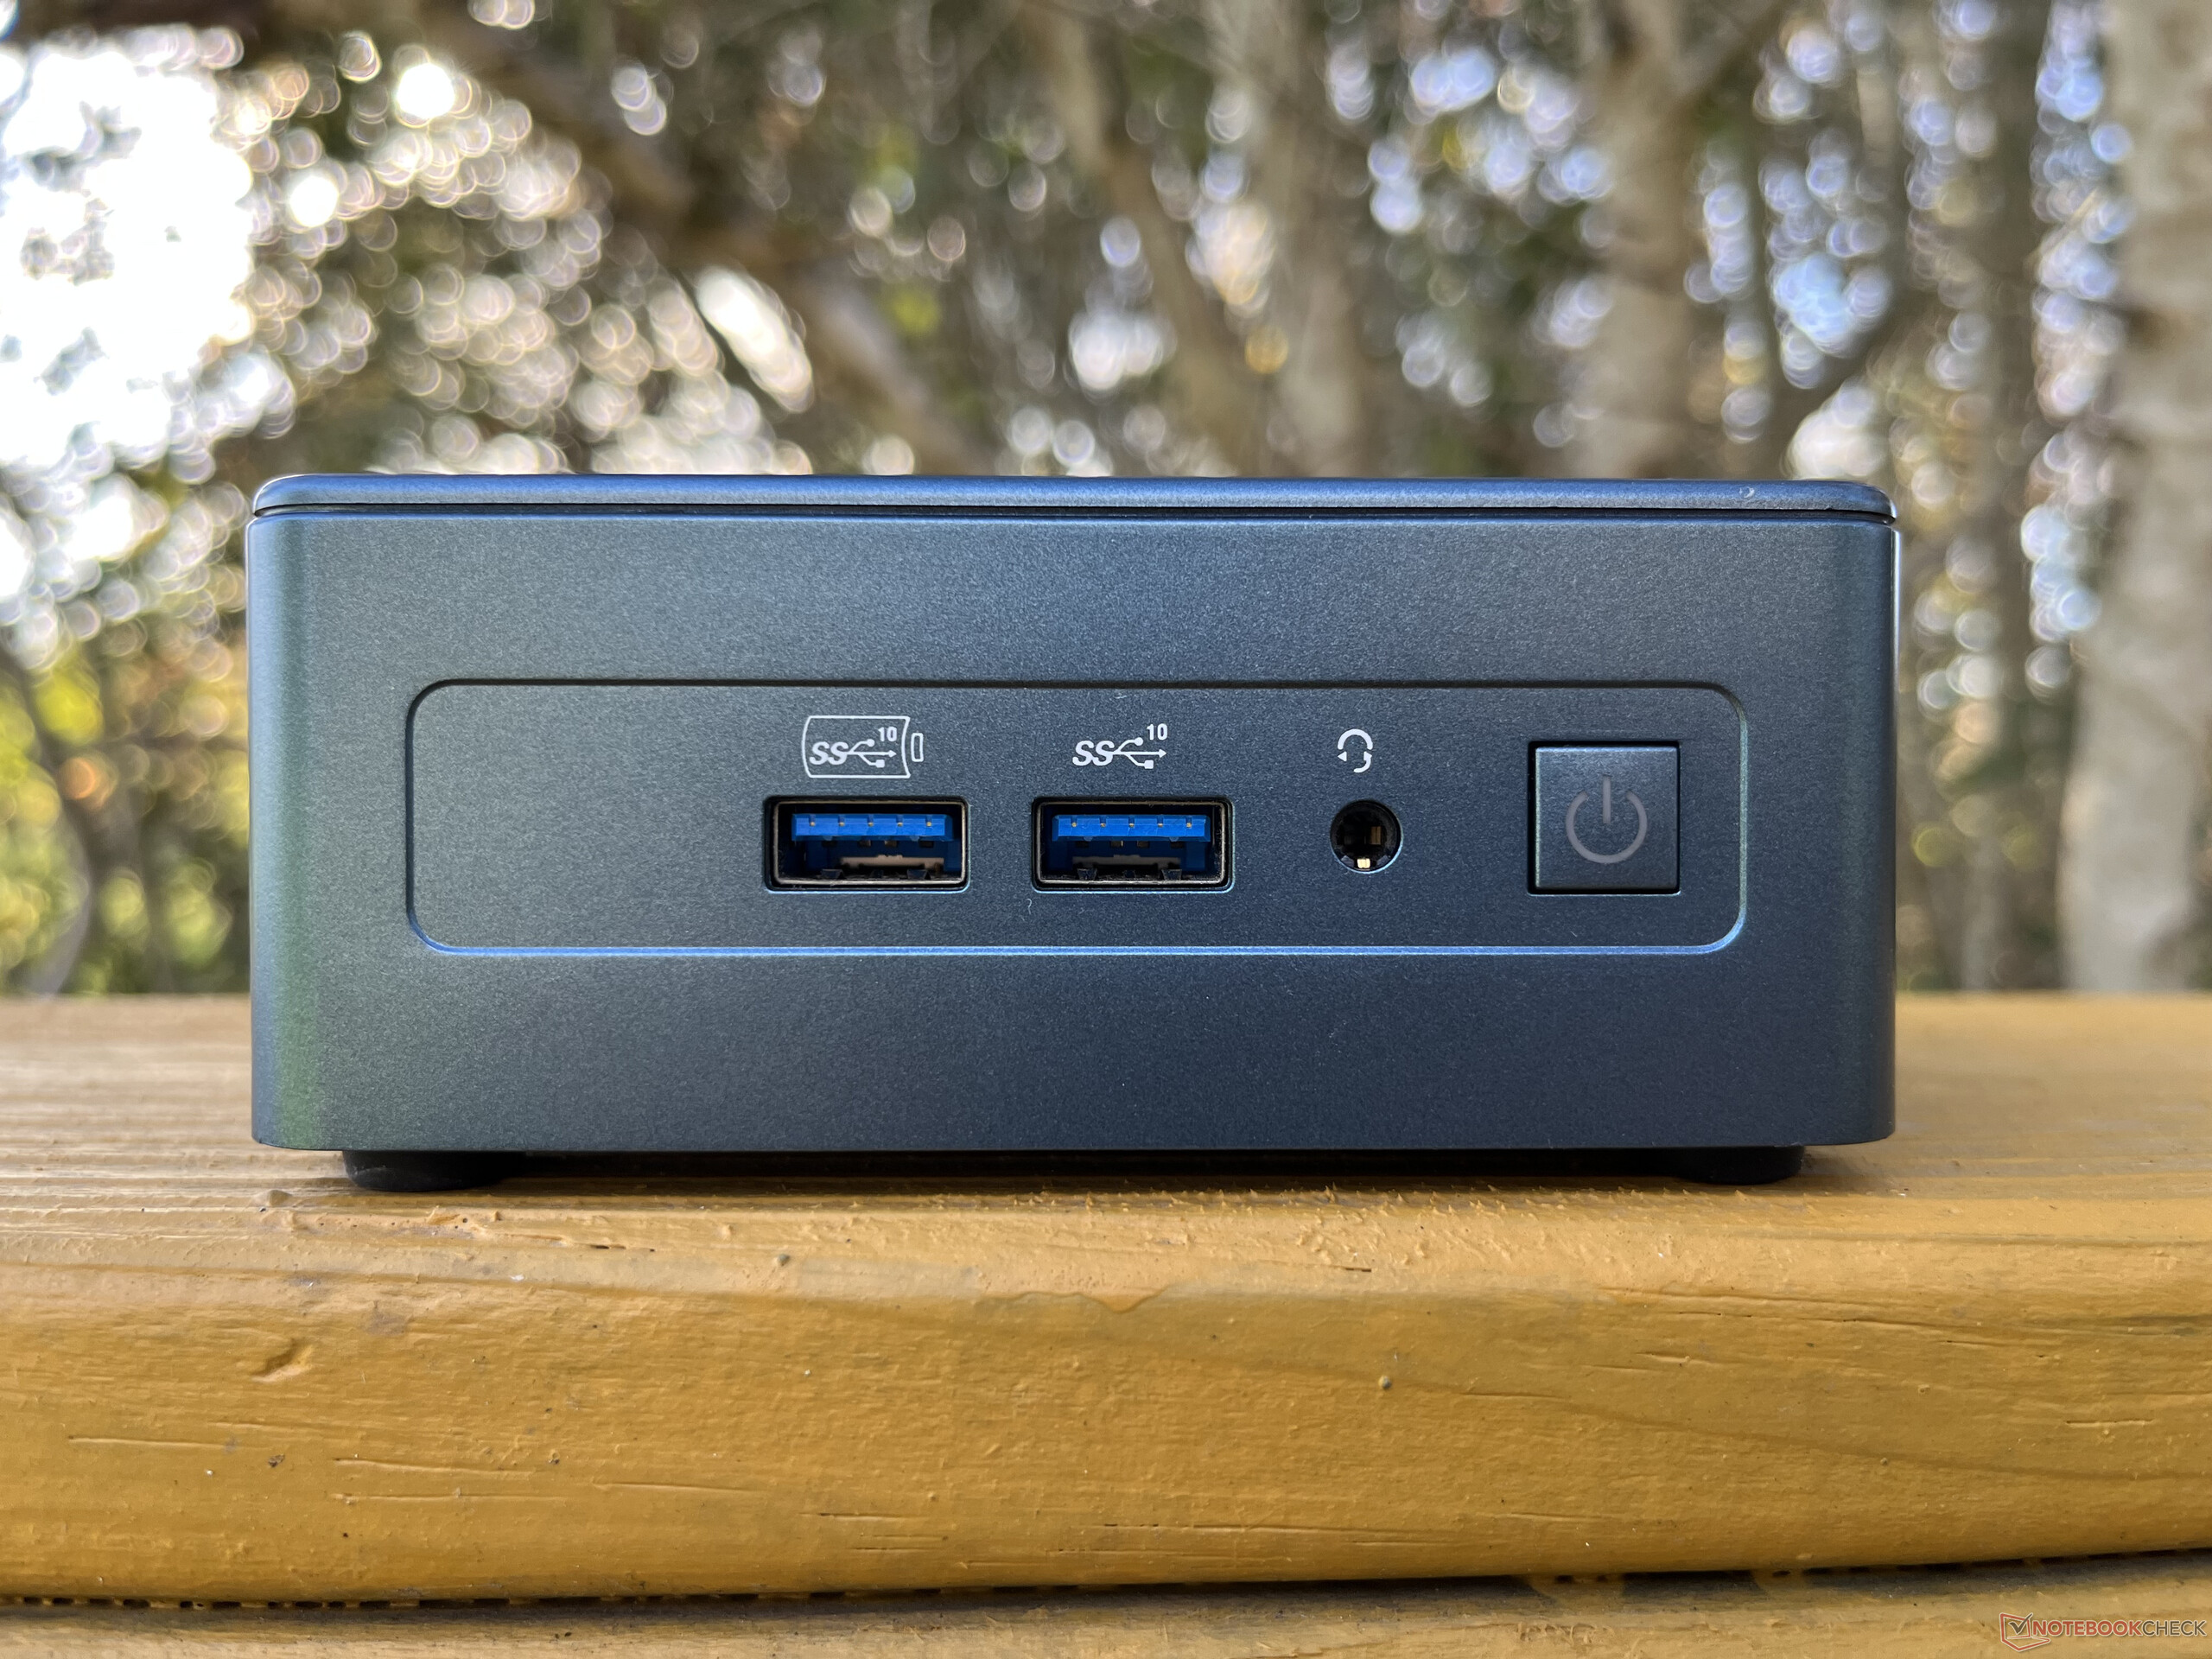 GEEKOM IT13 Mini PC Review - A $789 USD Tiny PC with an Intel Core